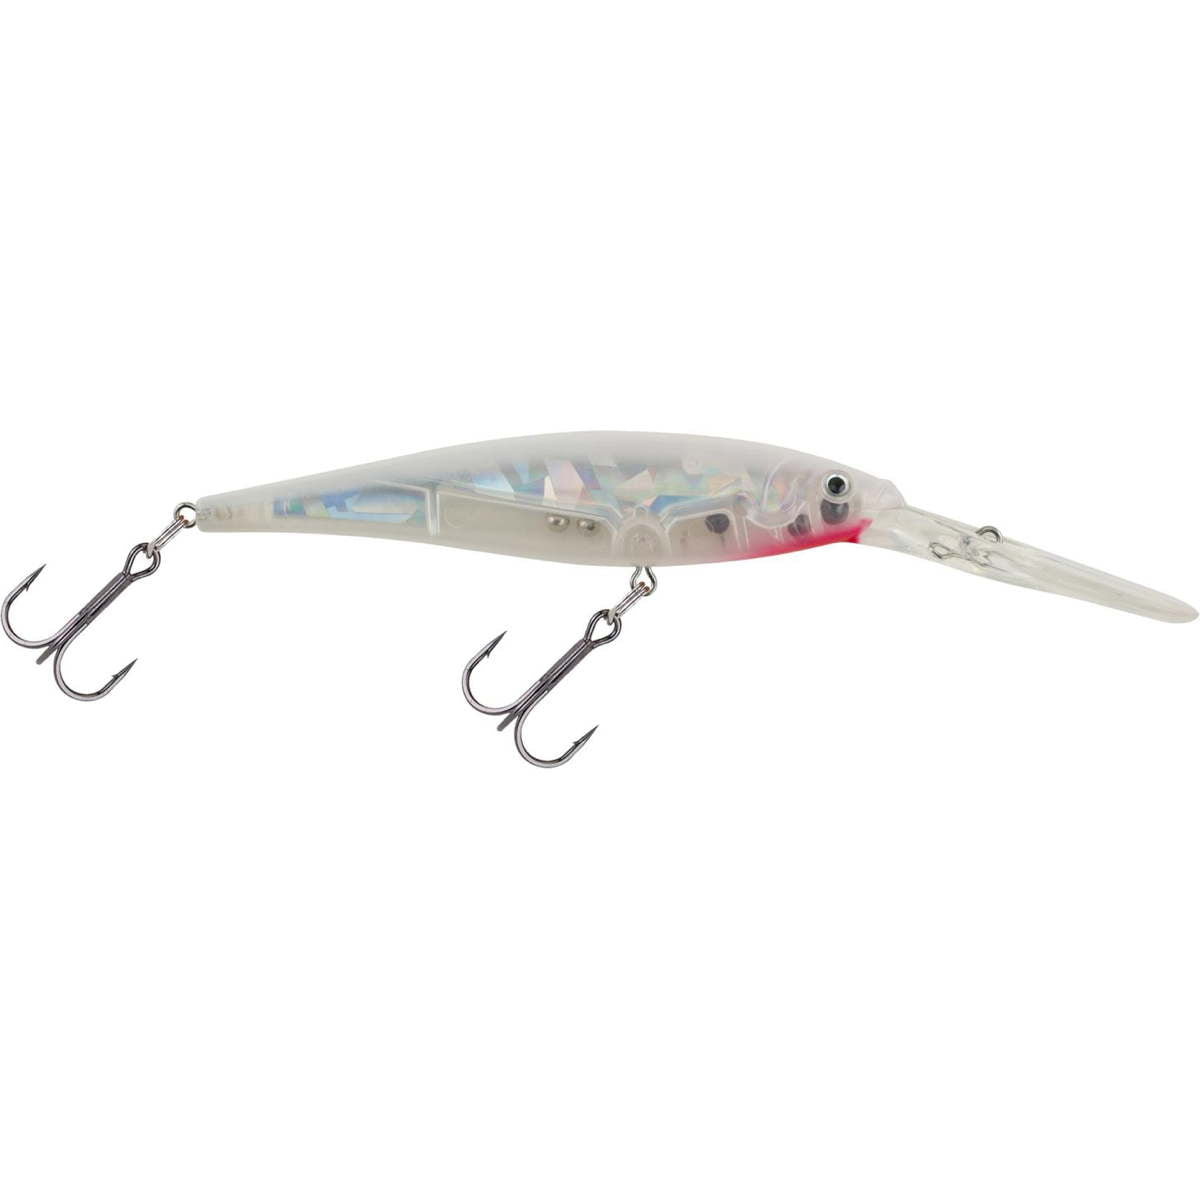 Photo of Berkley Flicker Minnow for sale at United Tackle Shops.